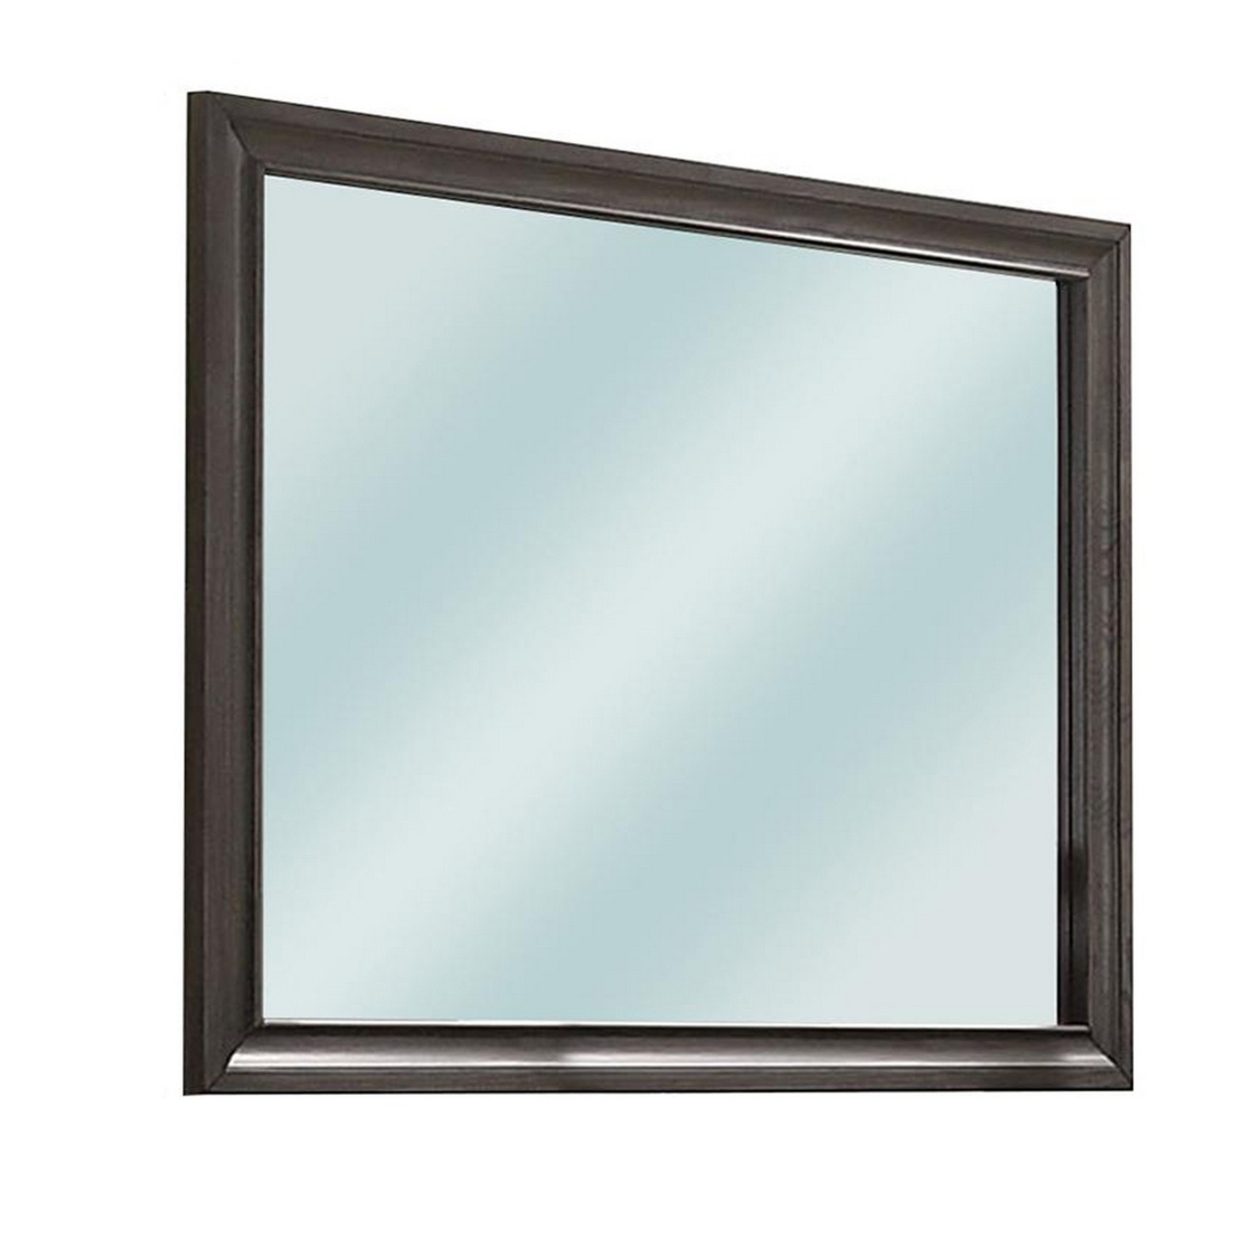 Mirror With Wooden Frame And Molded Detail, Dark Gray- Saltoro Sherpi